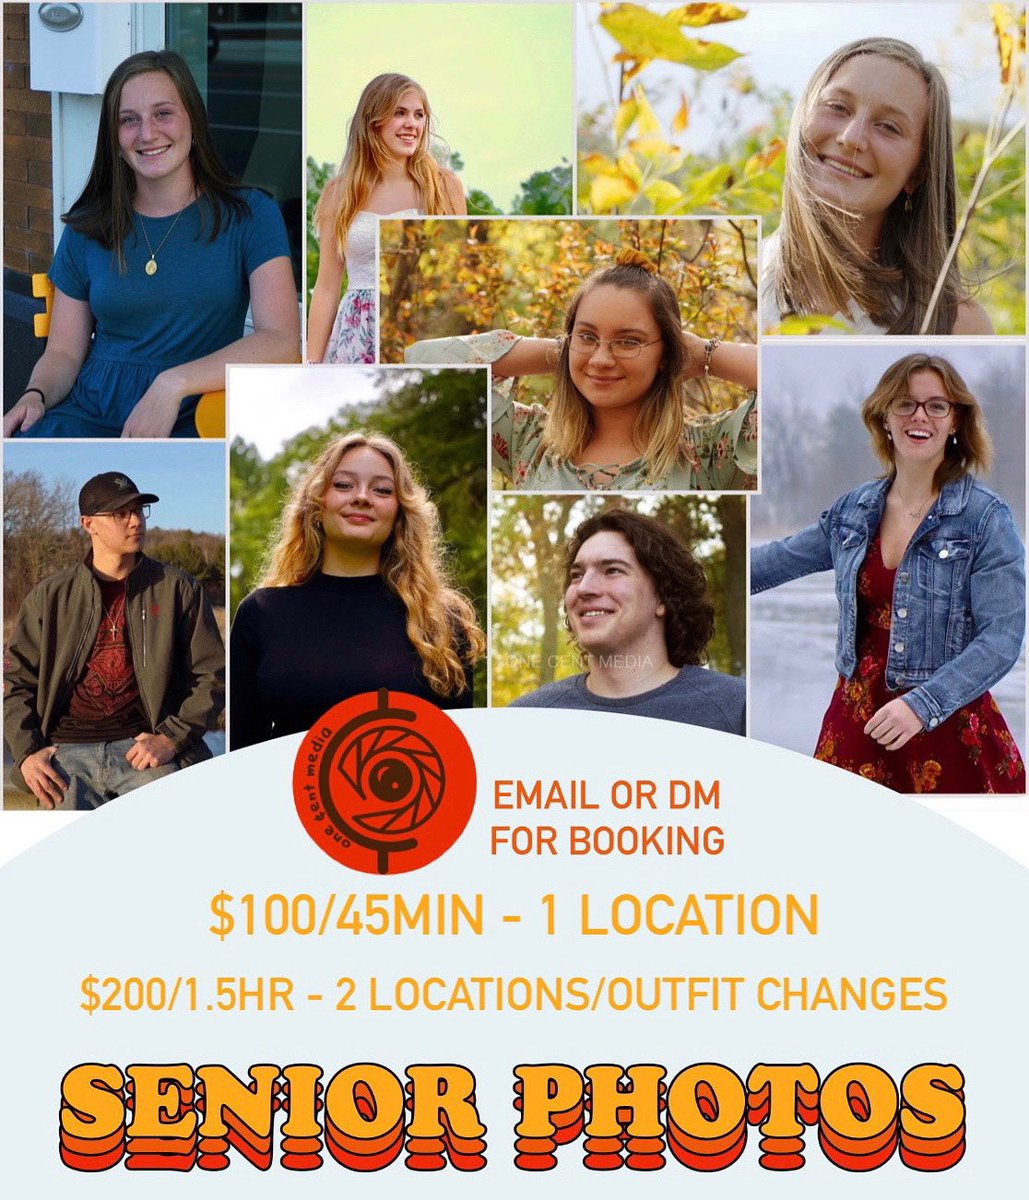 Hey seniors! Book now through April 15th and get 10% off some pics that truly showcase who you are.
#MinnesotaPhotographer #MinnesotaPortraitPhotographer #SmallBusiness #MinnesotaBusiness #ShopLocalMN #SeniorPhotography #Classof2023 #SeniorPhotos #SeniorPortraits #GraduationPics